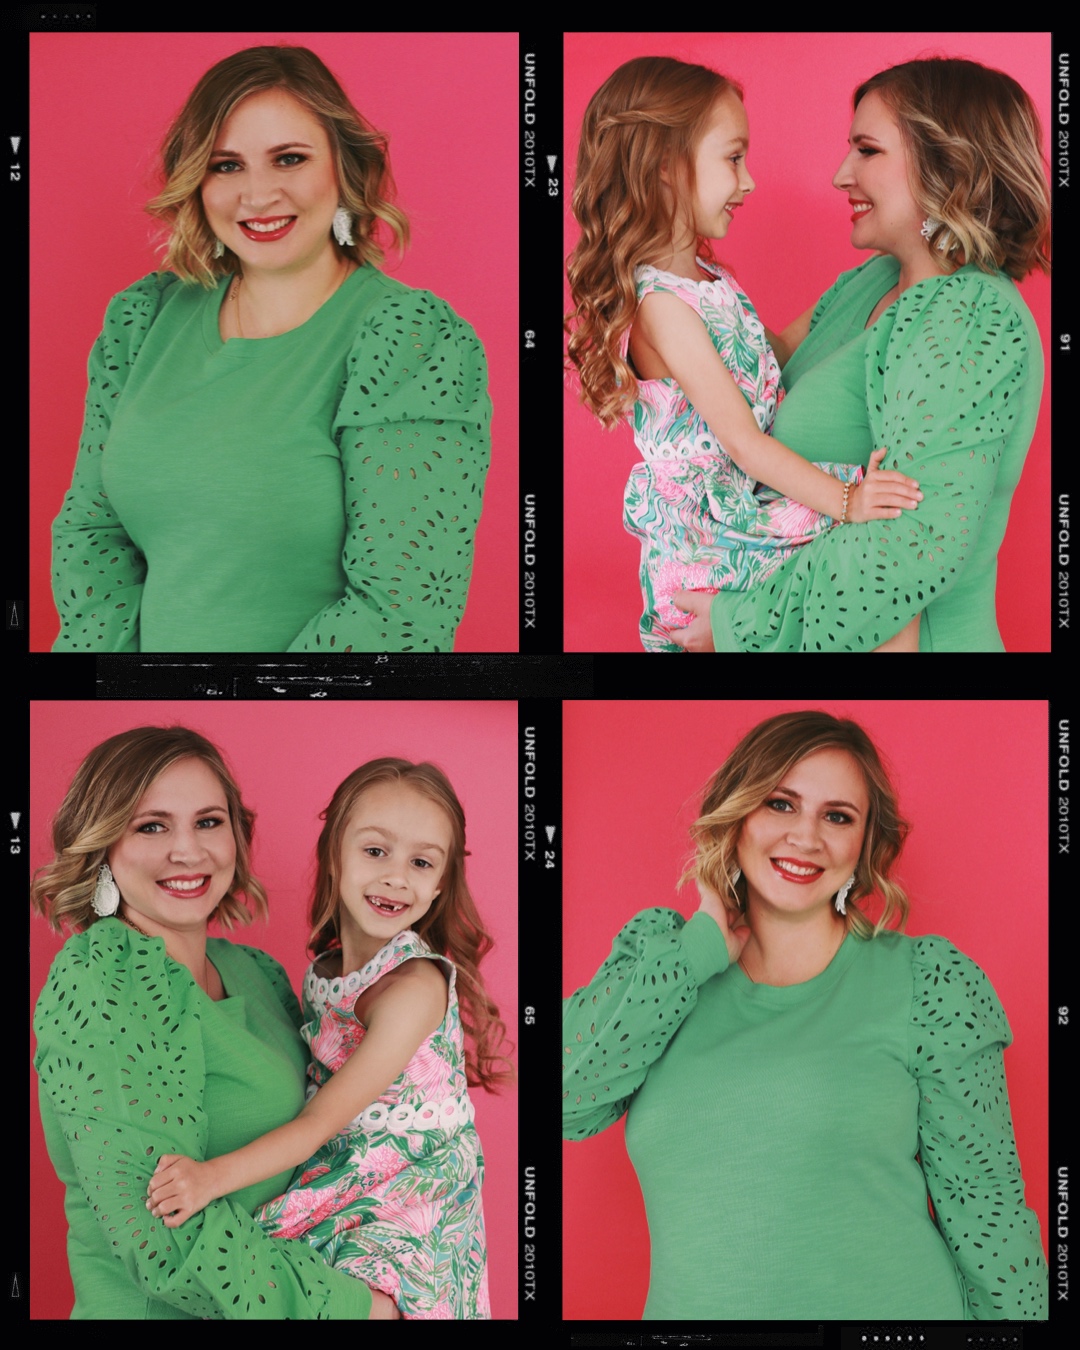 Mom and Daughter portrait on hot pink background taken in plano texas. mom is wearing a green dress and daughter is wearing a floral dress